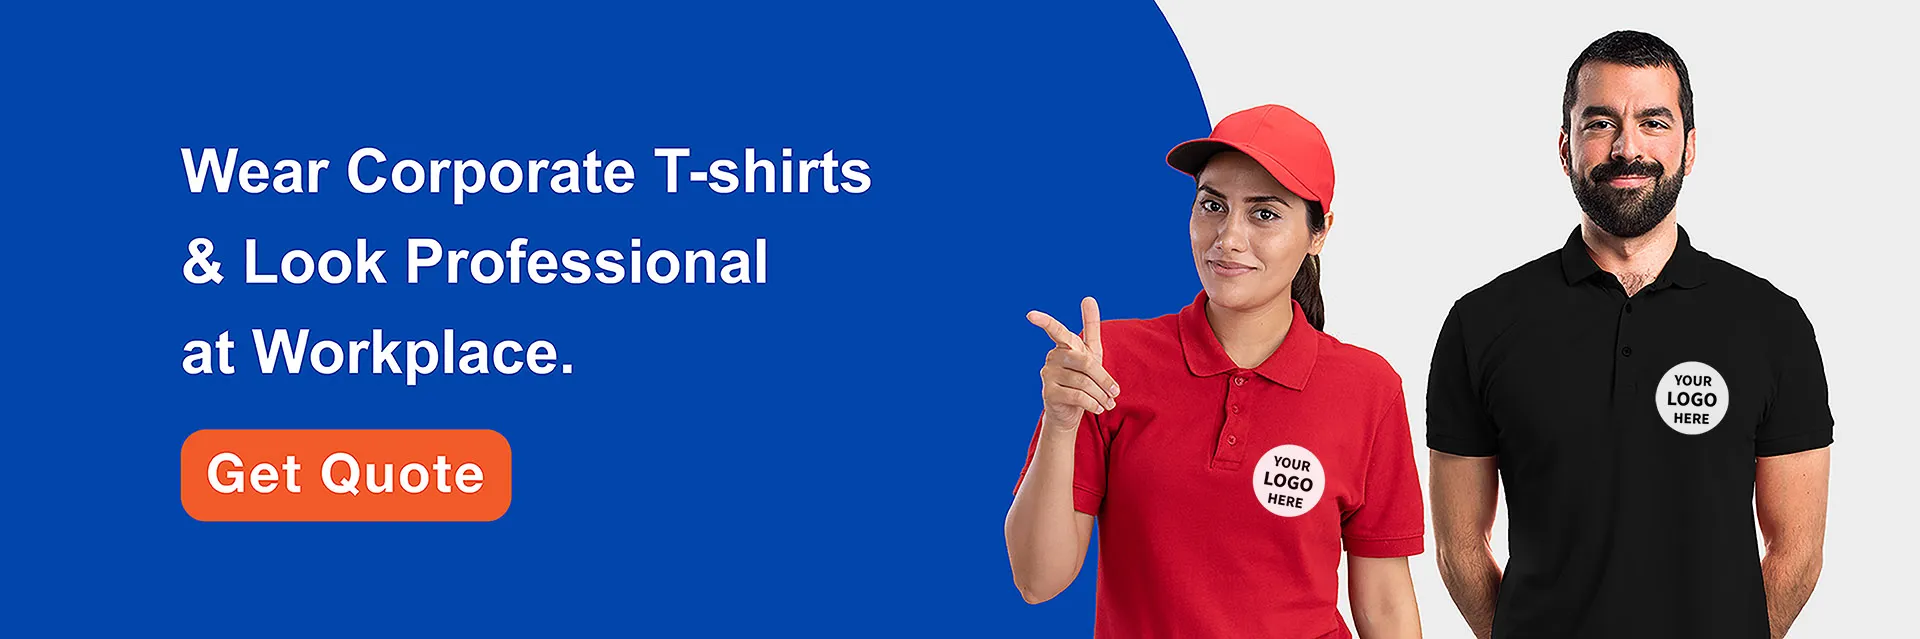 corporate t shirt manufacturers in pune uniforms for hotels industrial and company staff uniform